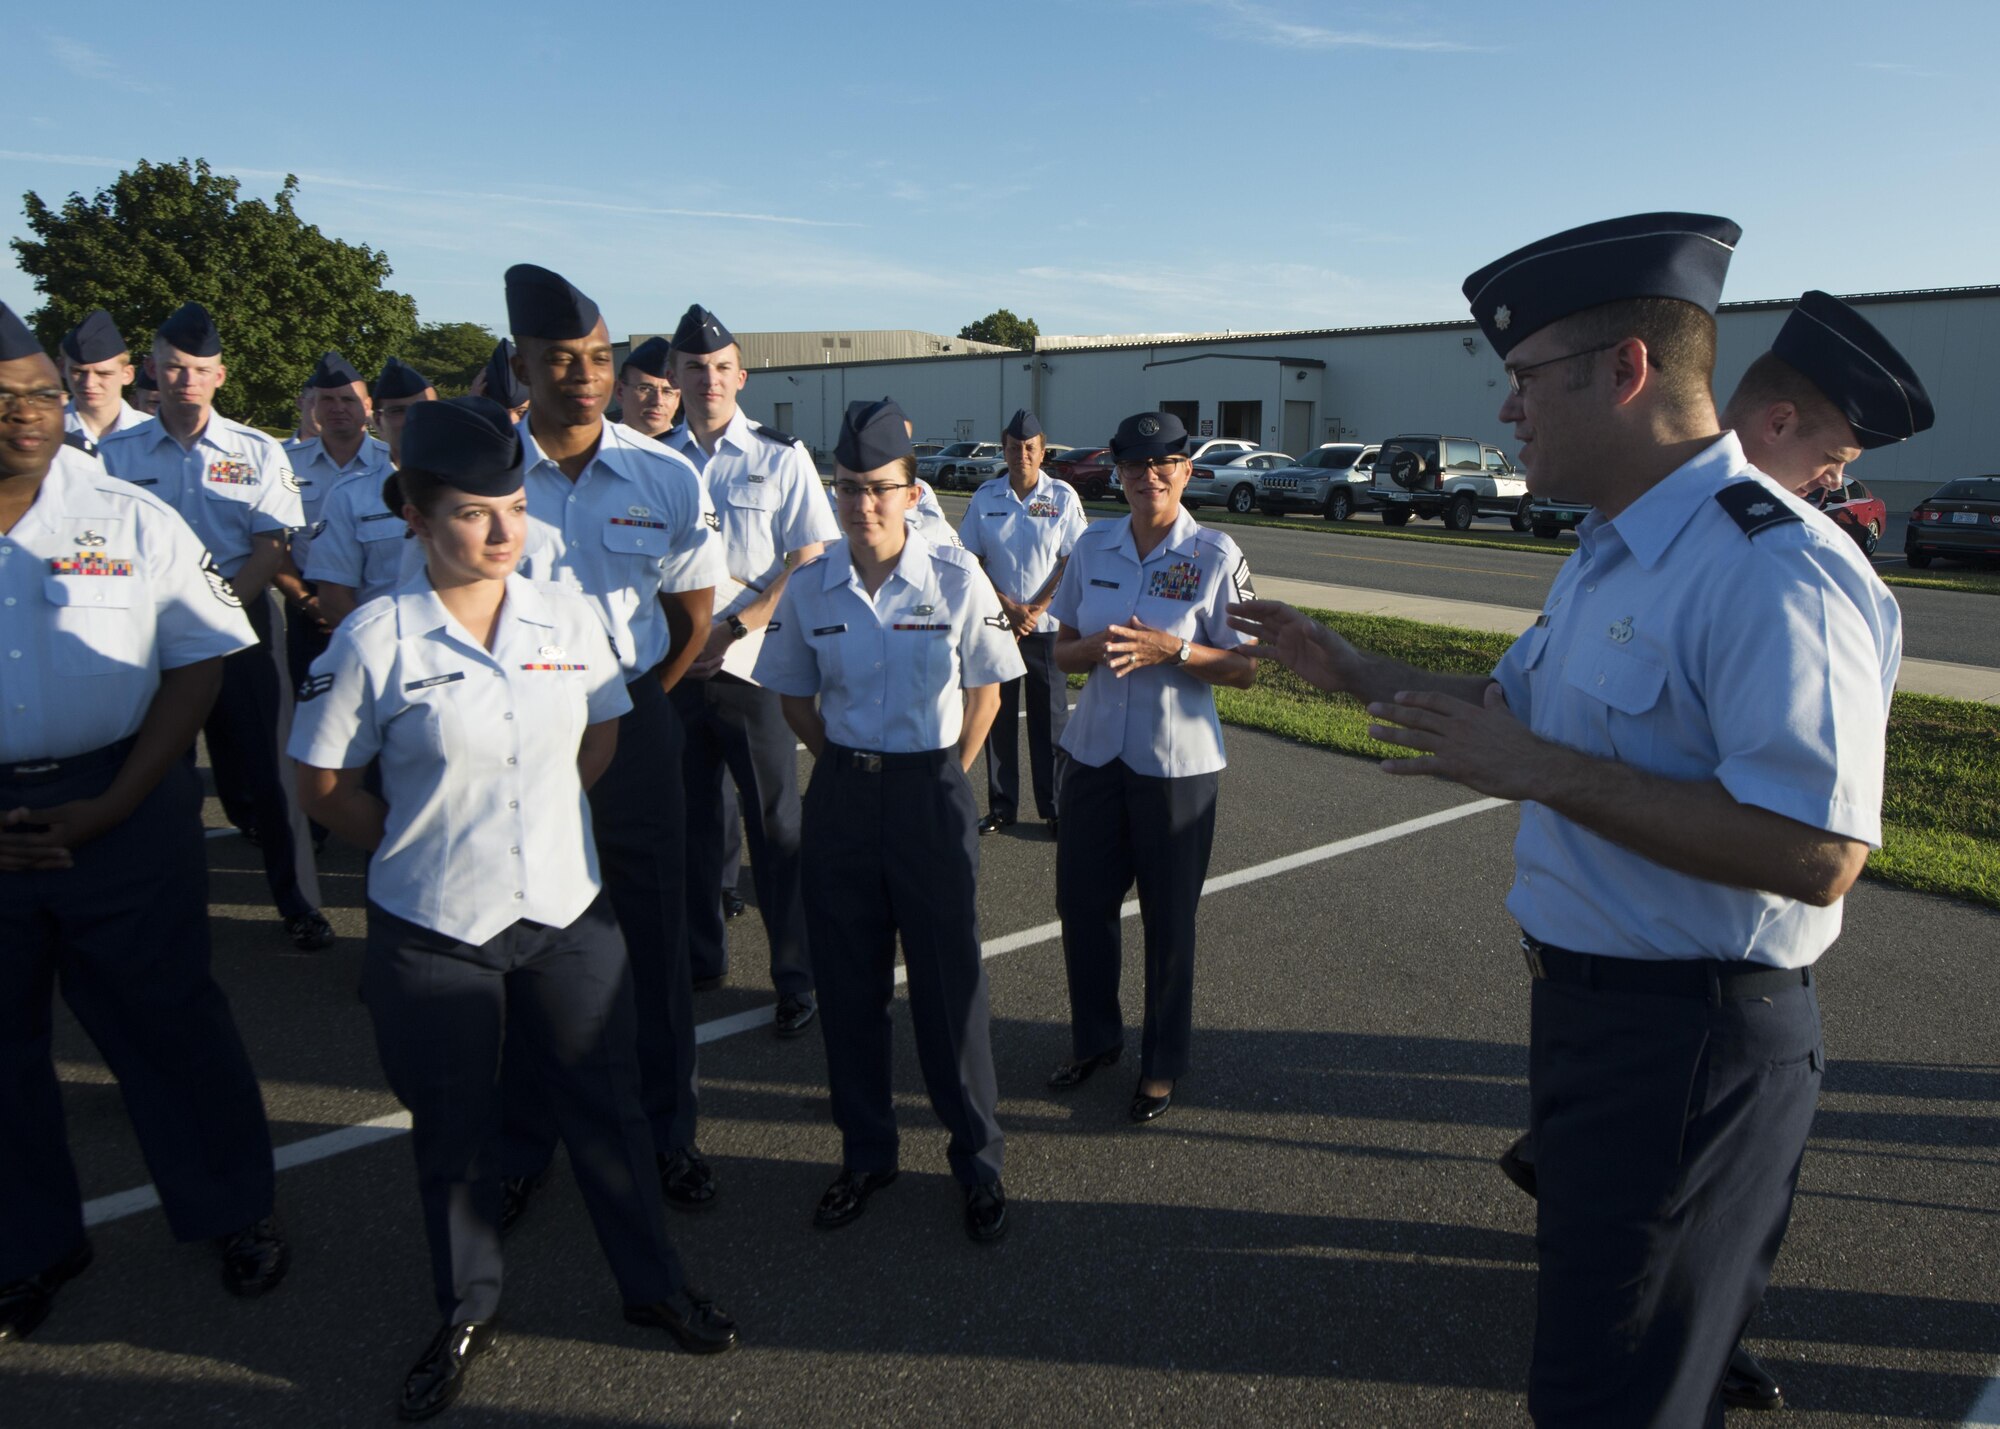 Lt. Col. Todd Walker, 436th Logistics Readiness Squadron commander, speaks to Airmen under his command after an open-ranks inspection Aug. 17, 2016, on Dover Air Force Base, Del. The squadron is planning to hold these inspections quarterly. (U.S. Air Force photo/Senior Airman Zachary Cacicia)